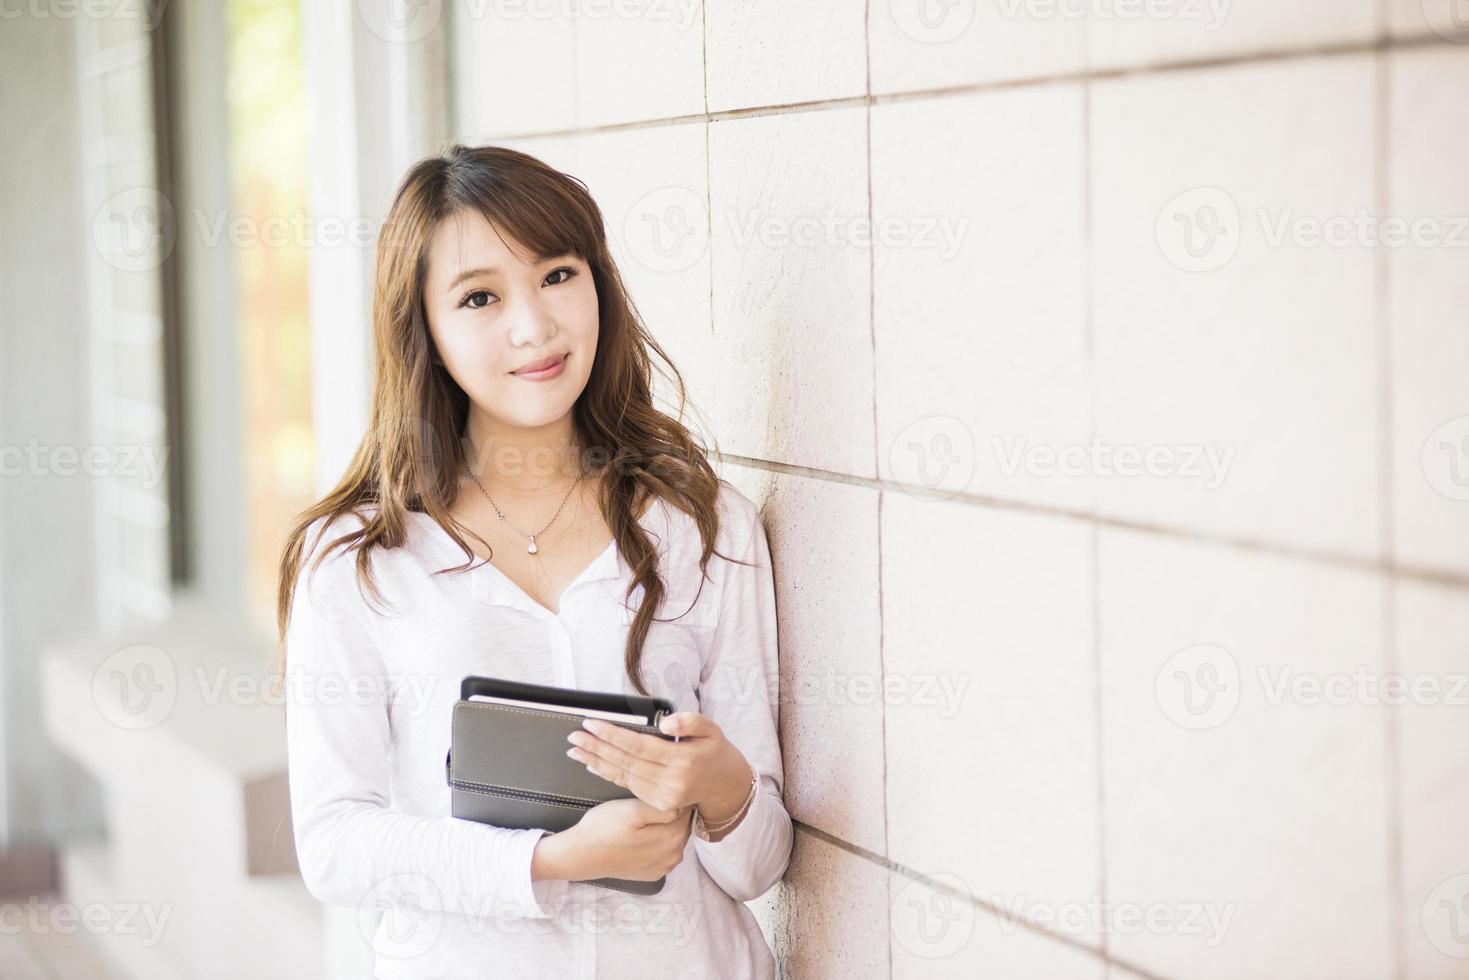 Asian female college or university student photo